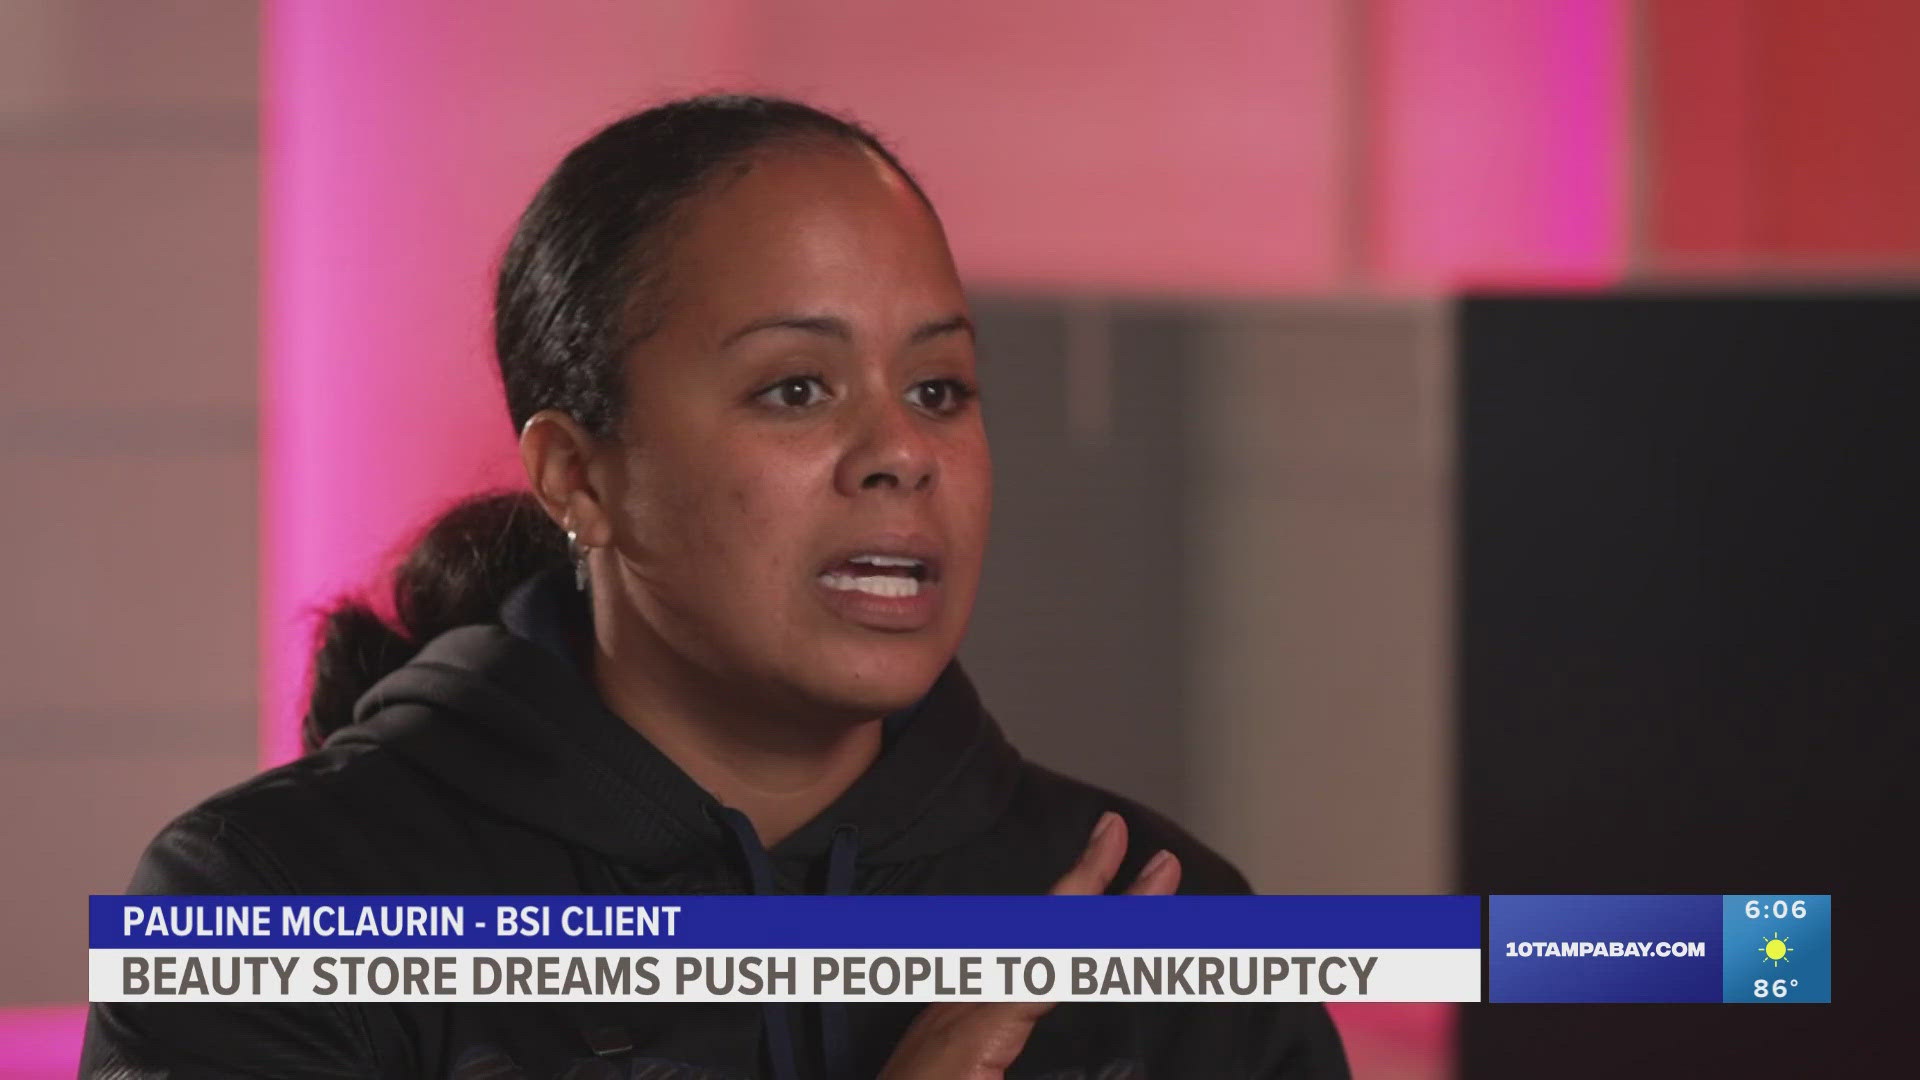 A company promising to help Black entrepreneurs run their own beauty supply business is leading some to bankruptcy instead.